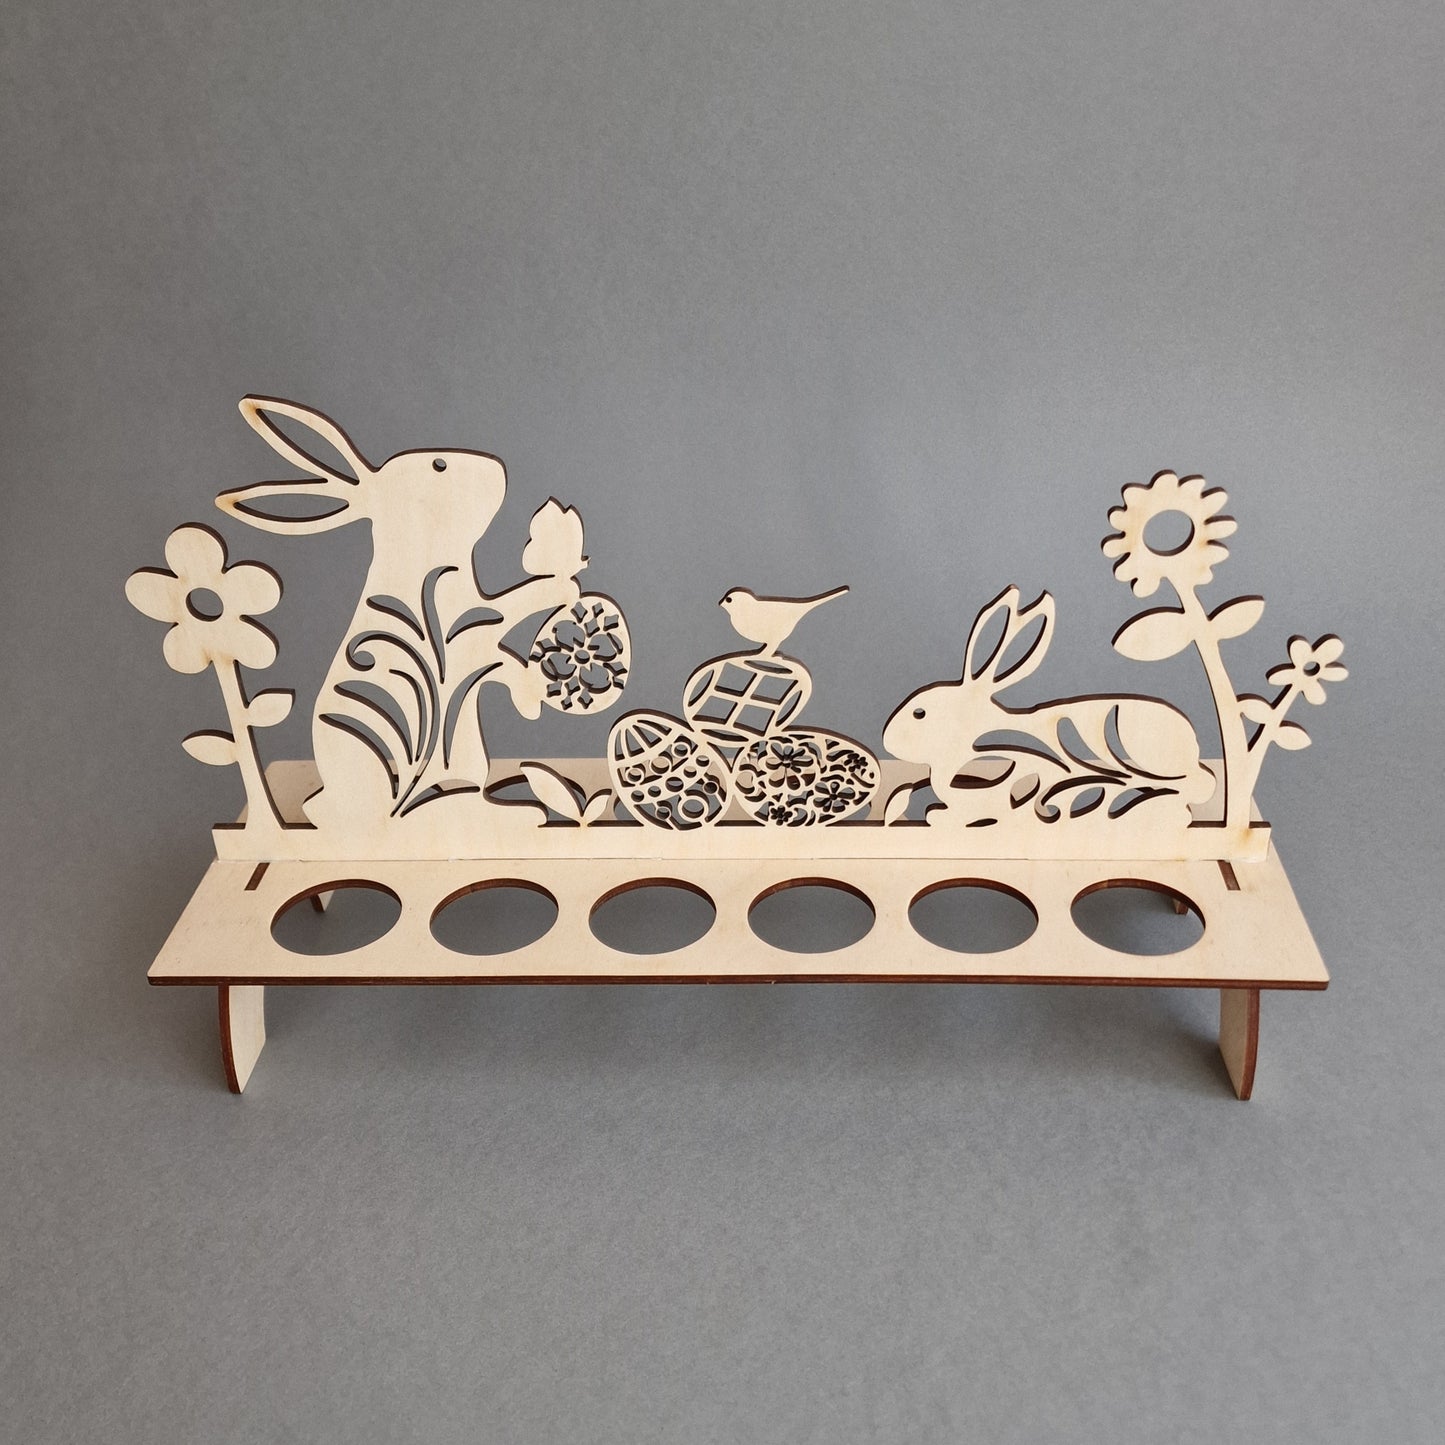 Light plywood 12 egg holder with bunnies/eggs/flowers 35x12.5 cm height (RAJO 25)